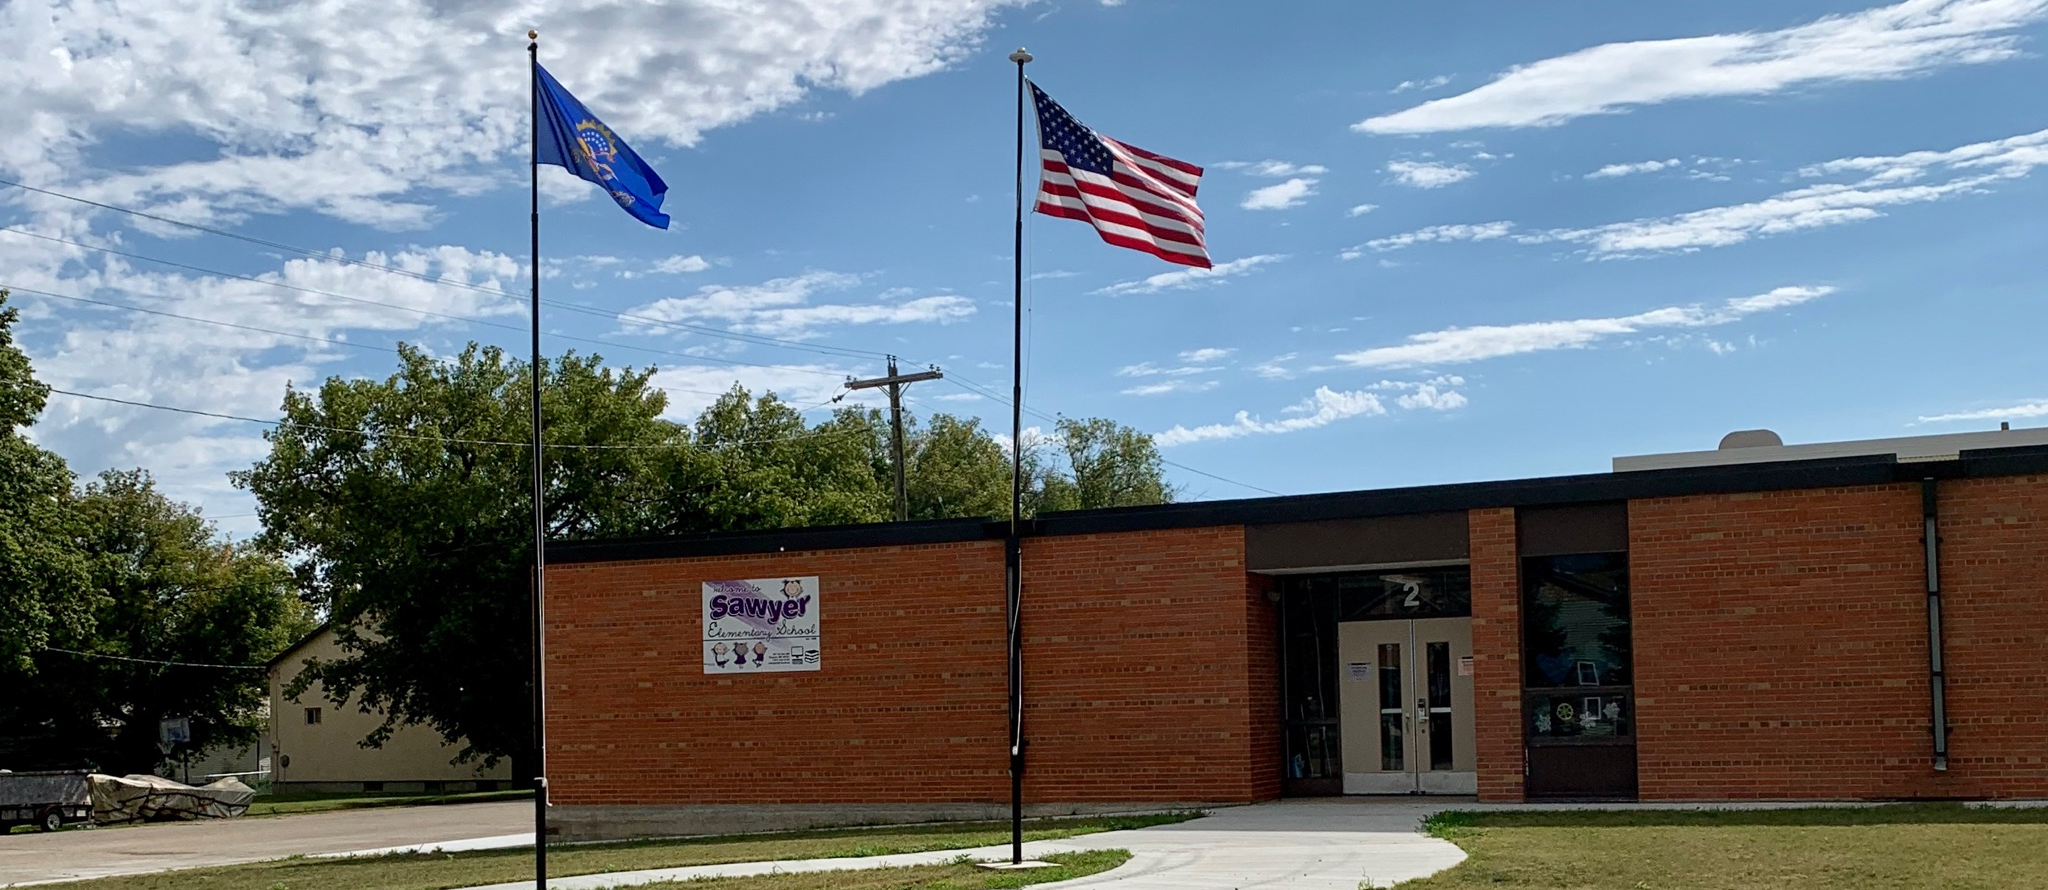 Outside view of Sawyer School with the United States flag and North Dakota flag waving patriotically in the wind.